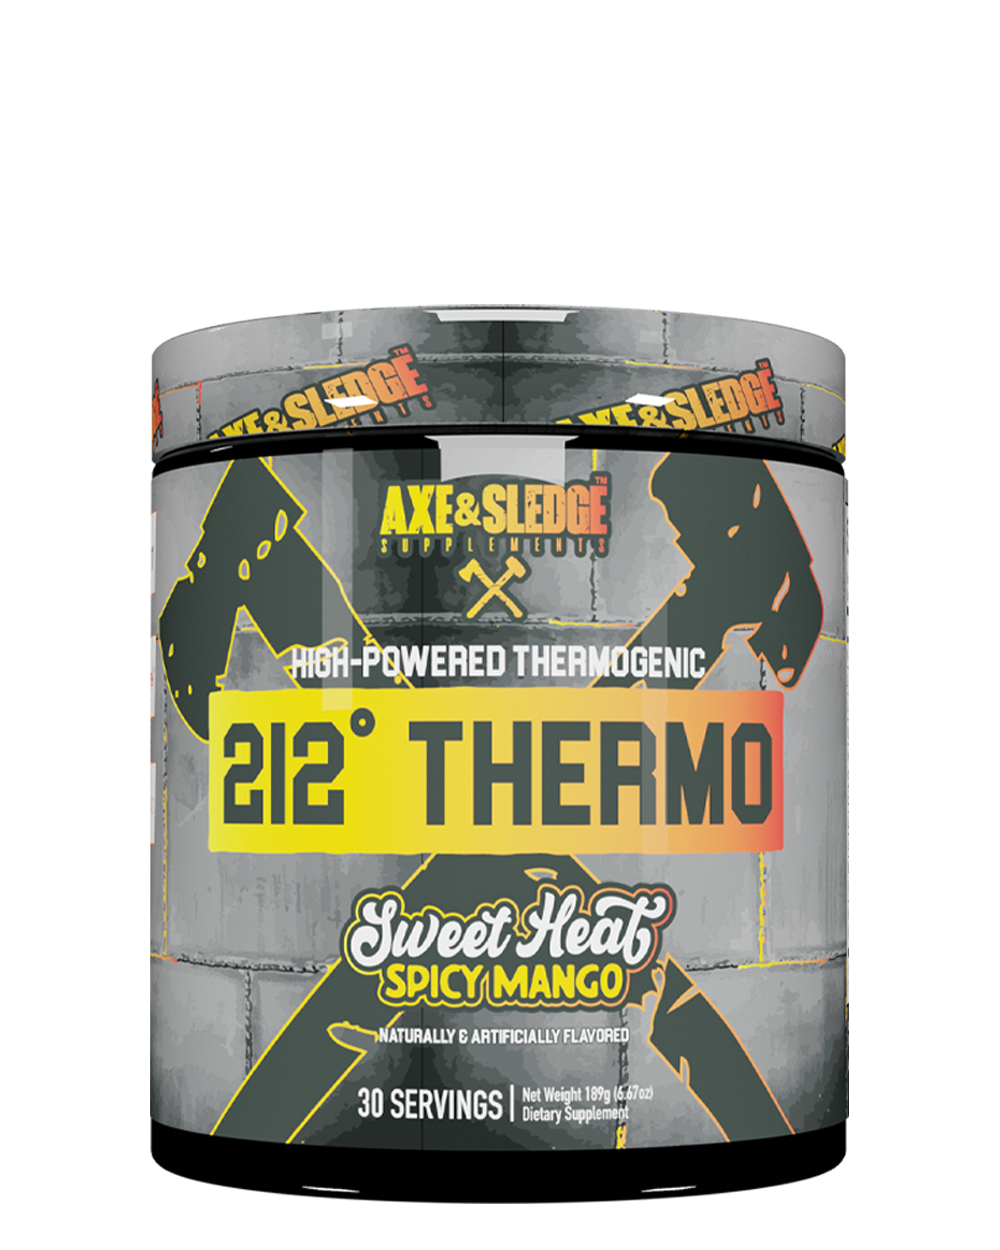 212° Thermo // Powdered Thermogenic